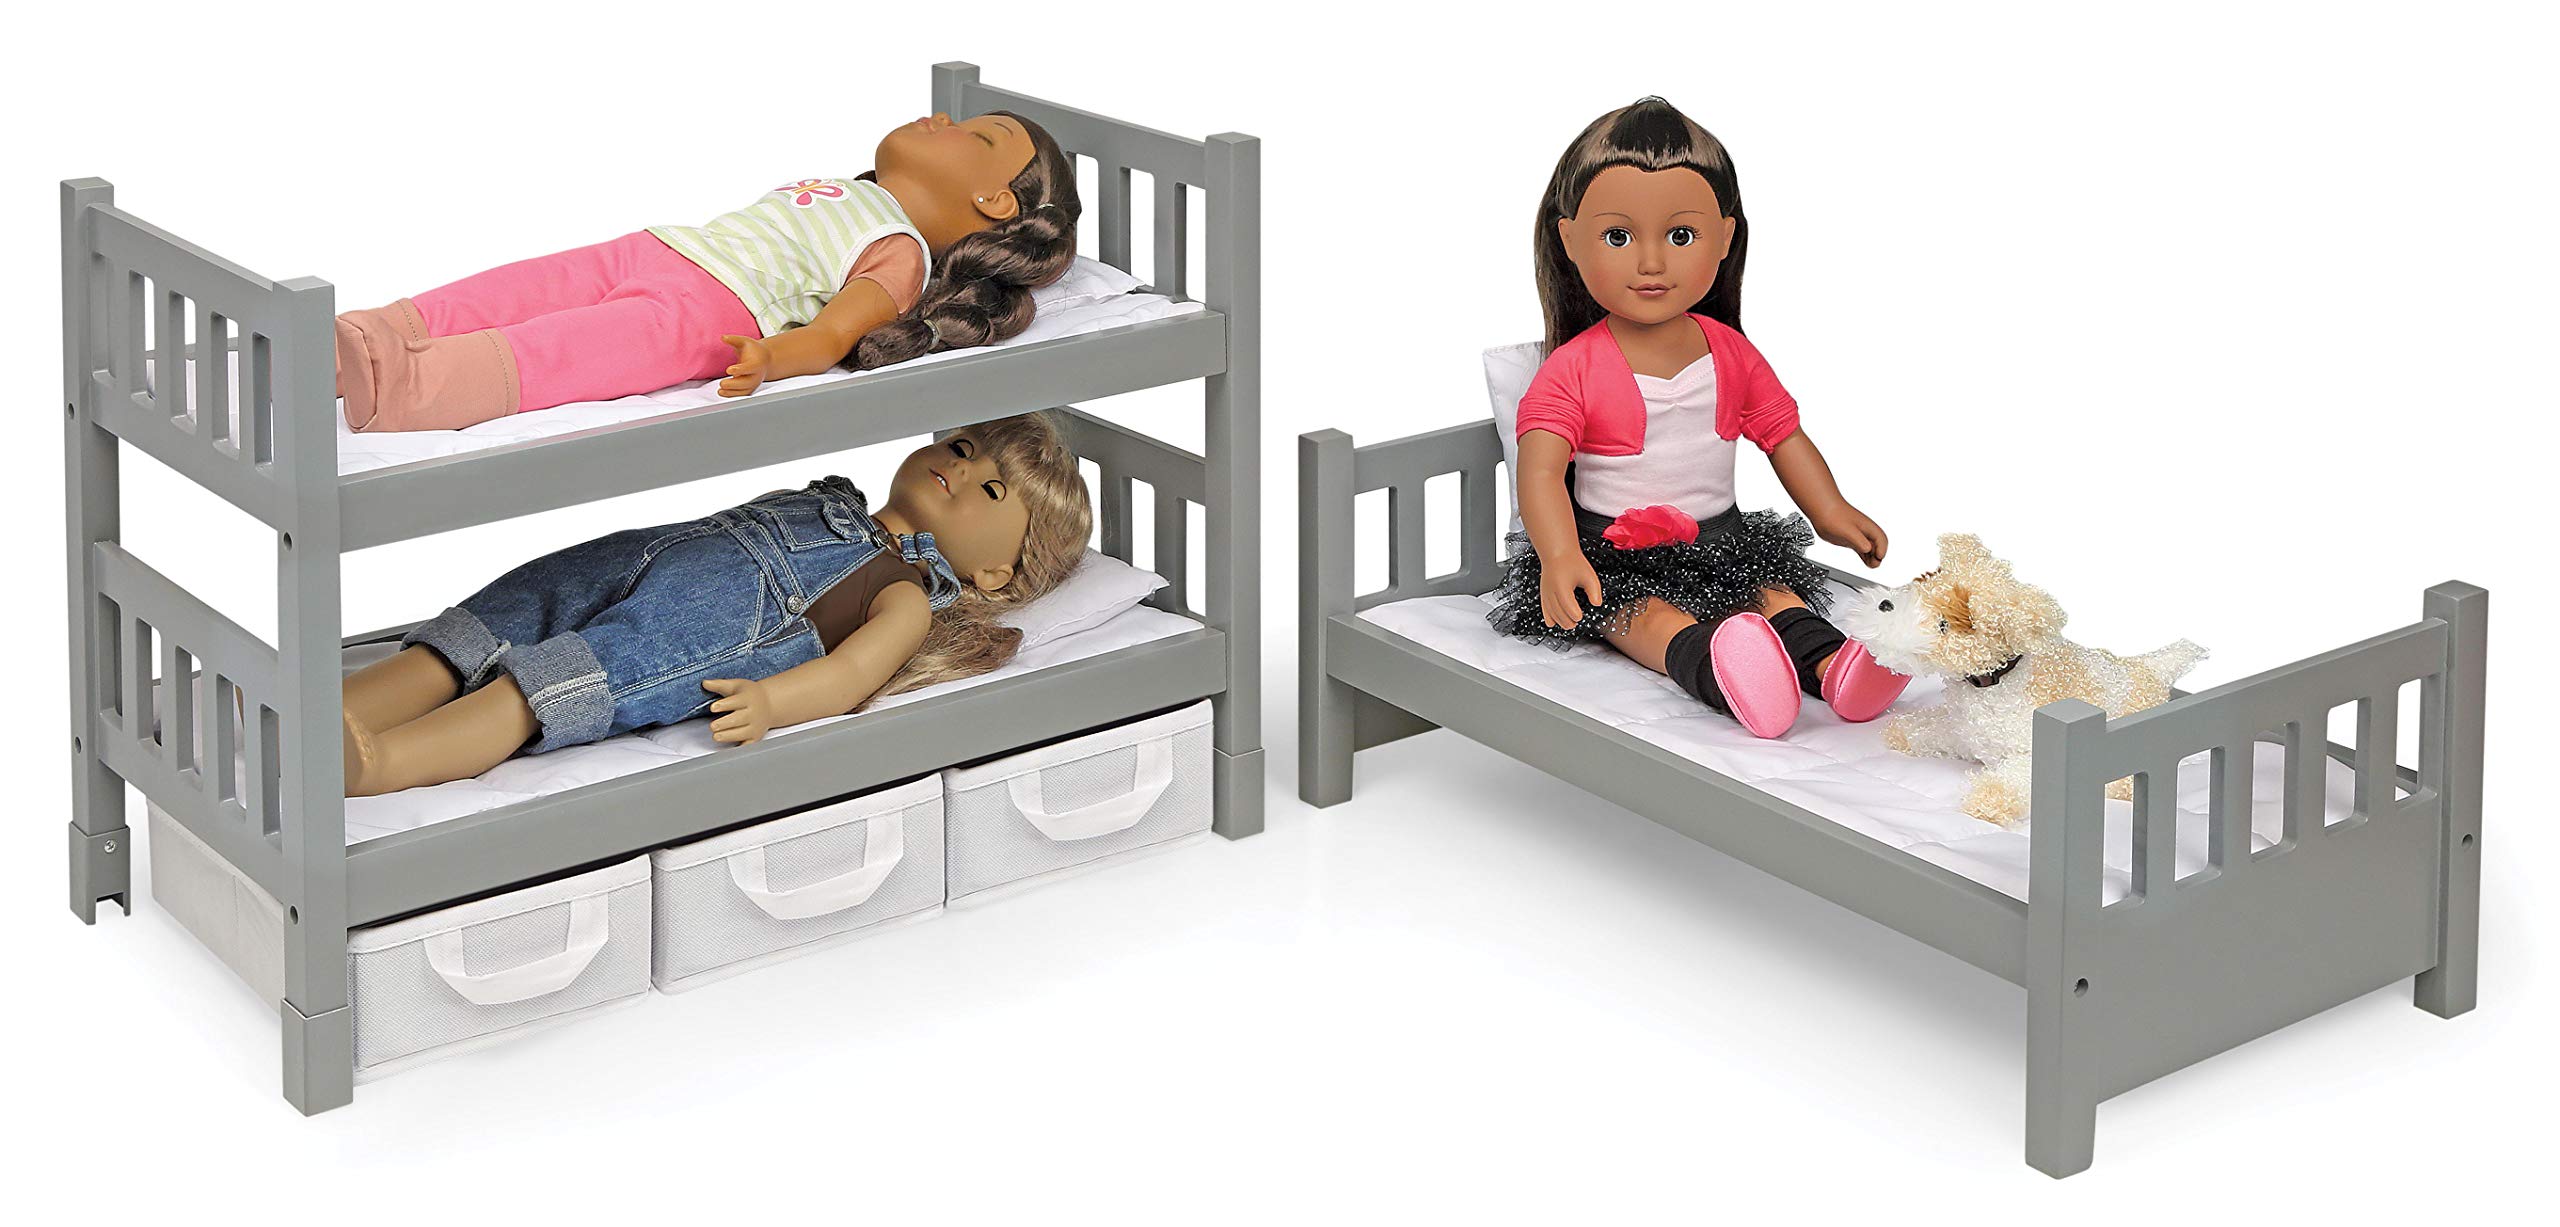 Badger Basket Toy 1-2-3 Convertible Doll Bunk Bed with Storage Baskets and Personalization Kit for 20 inch Dolls - Gray